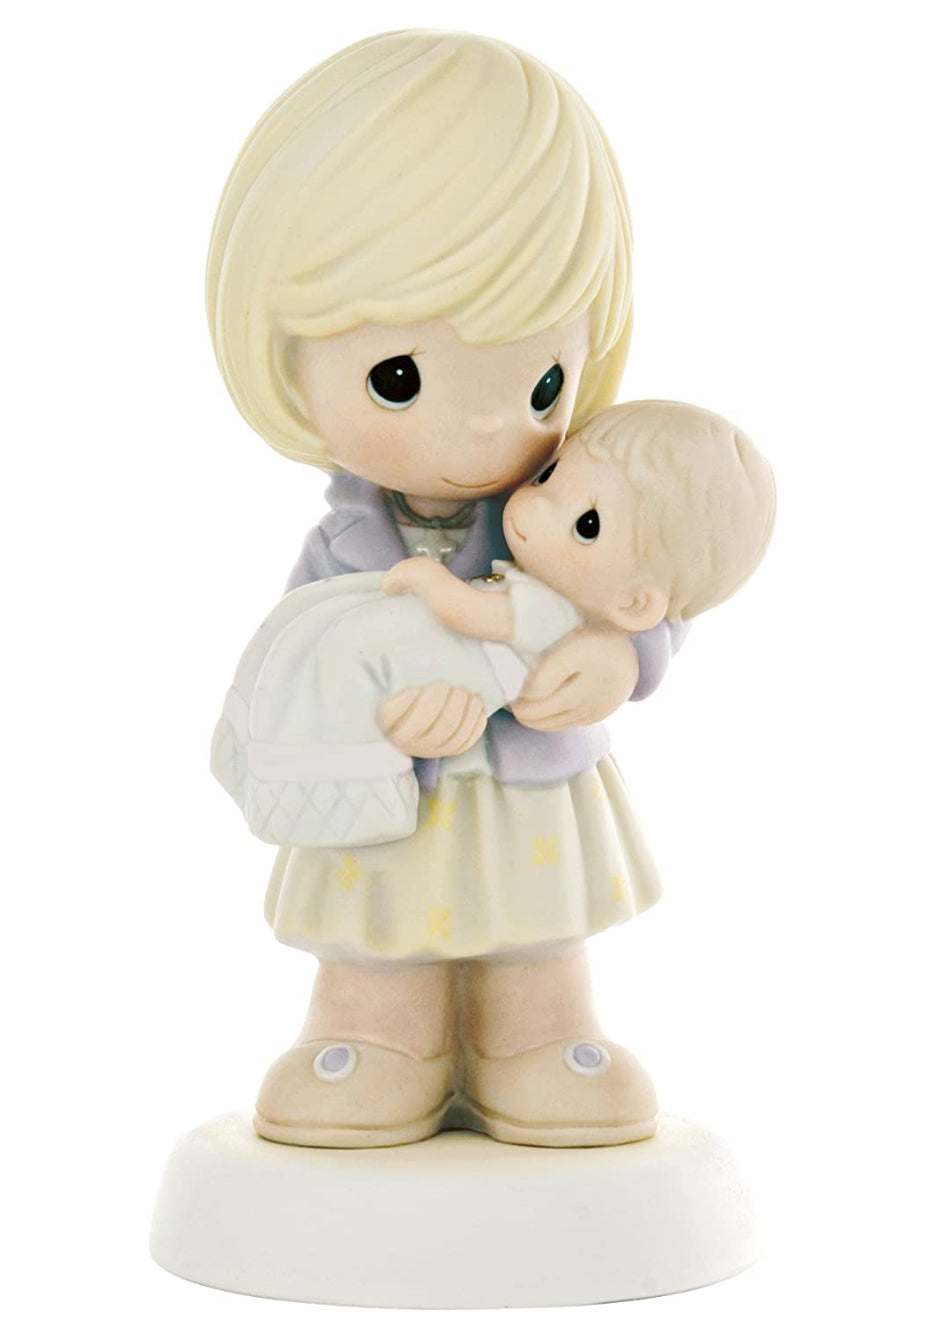 Godmother, You Were Chosen For Me With Faith and Love - Precious Moment Figurine